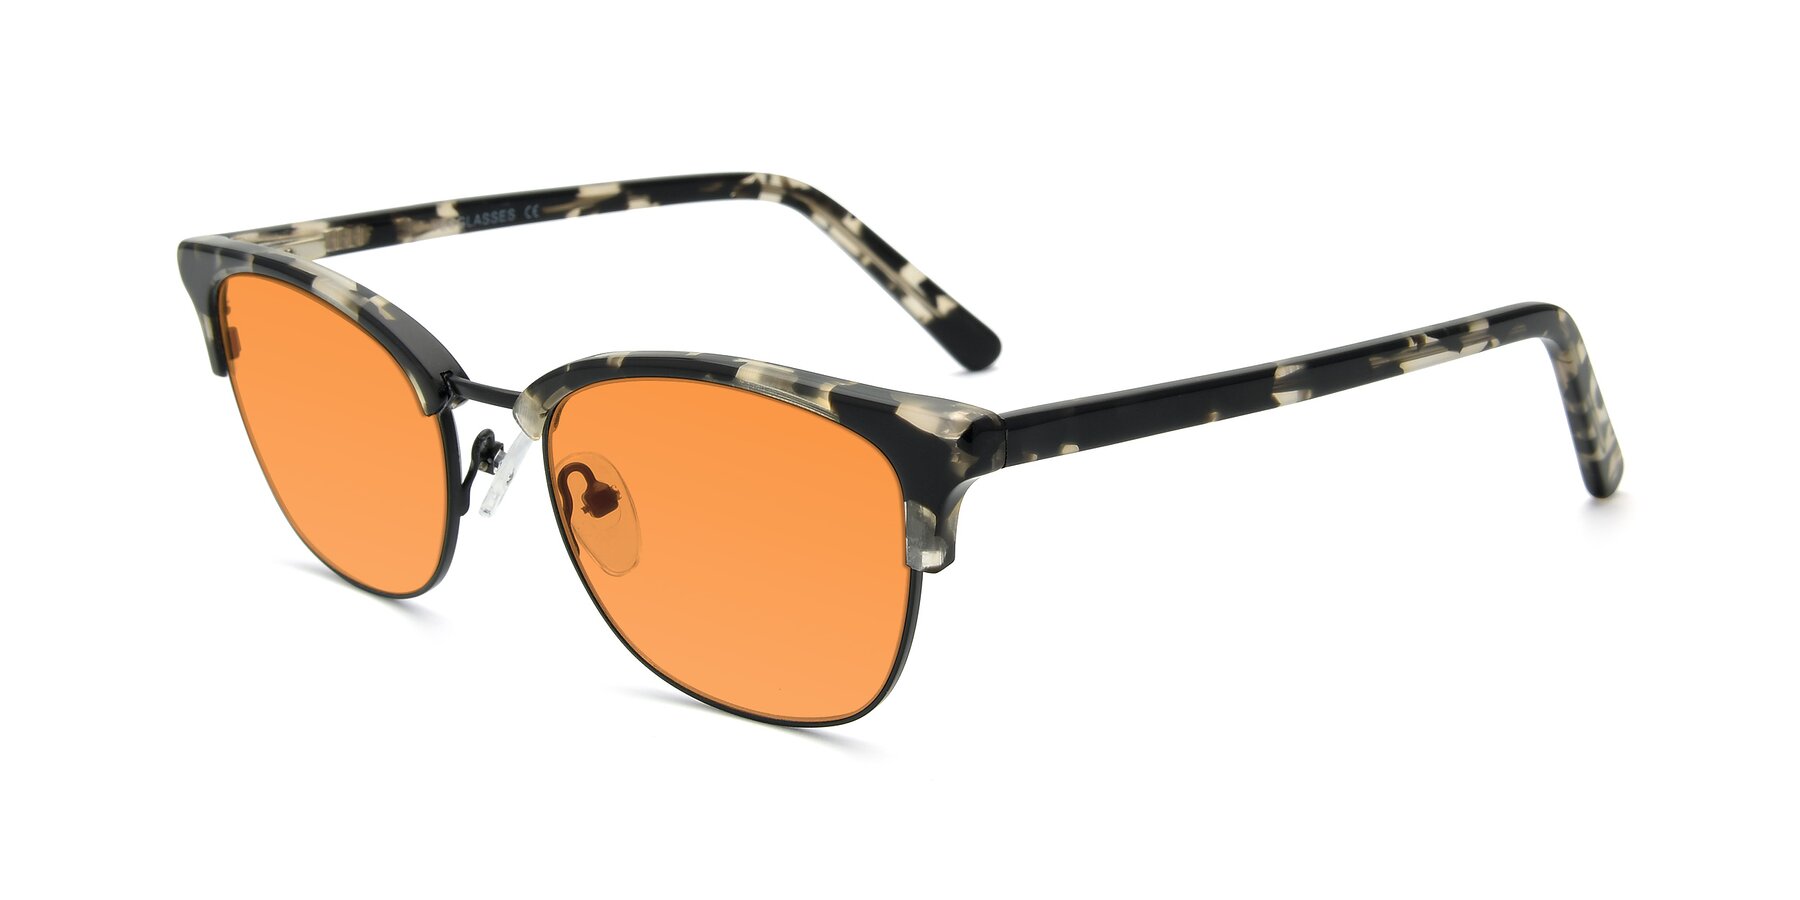 Angle of 17463 in Black-Tortoise with Orange Tinted Lenses